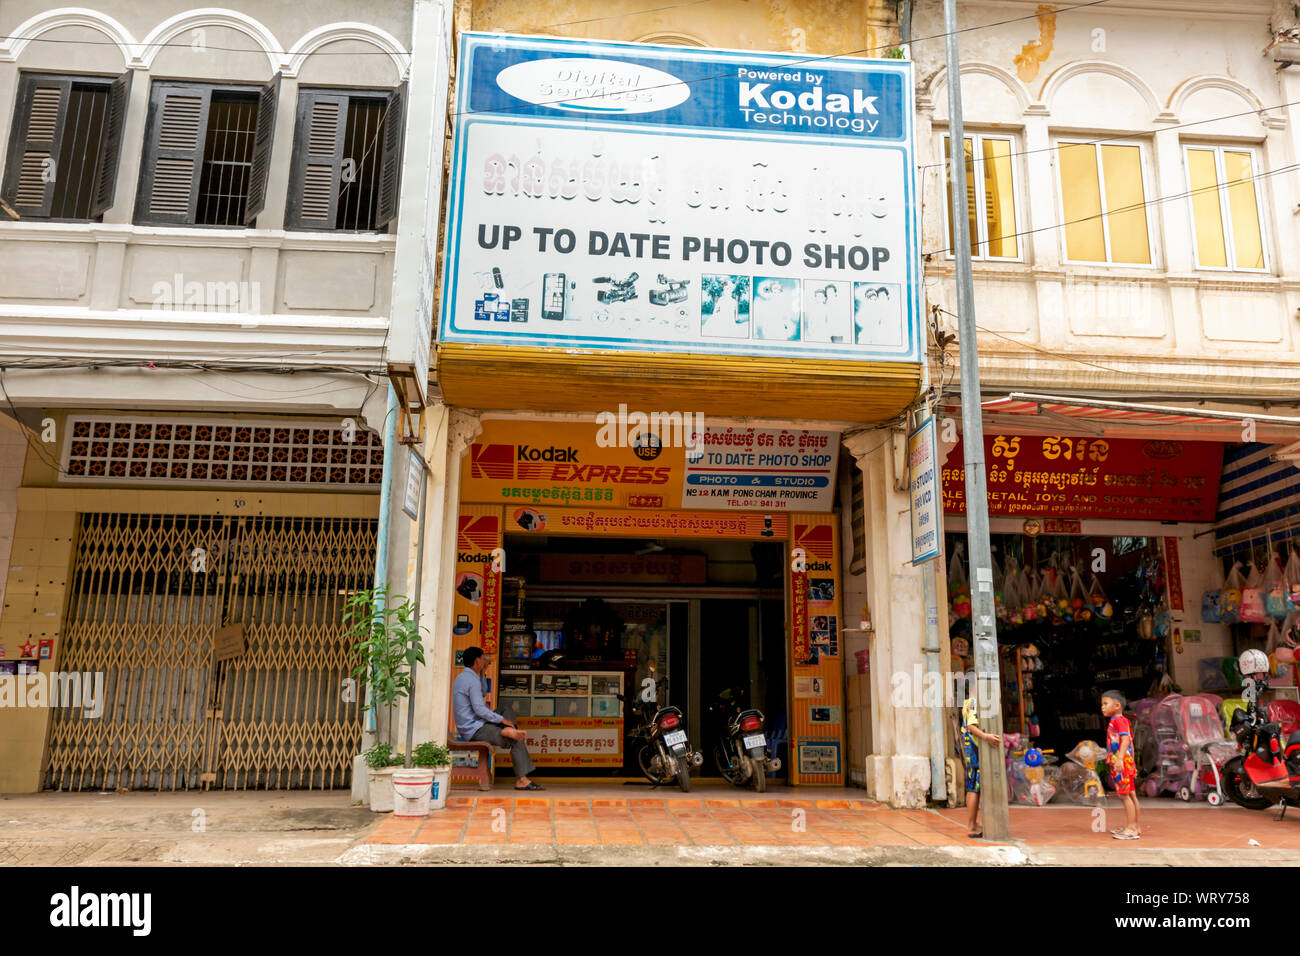 A store called Up To Date Photo Shop sells and processes Kodak brand film in Kampong Cham, Cambodia. Stock Photo